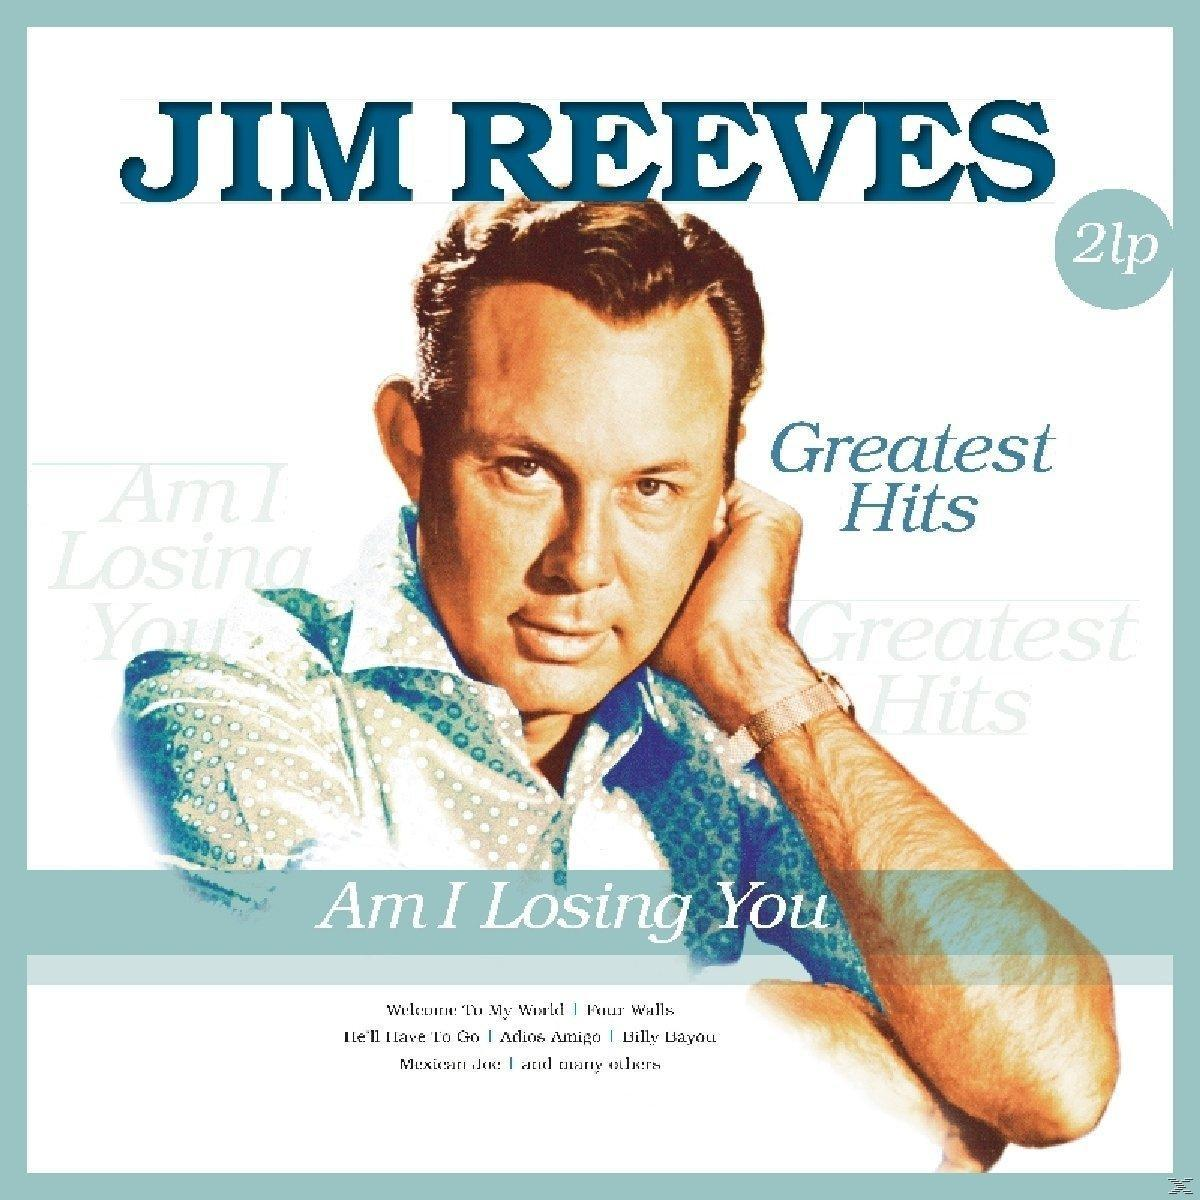 I (Vinyl) - - YOU-GREATEST Jim HITS AM LOSING Reeves